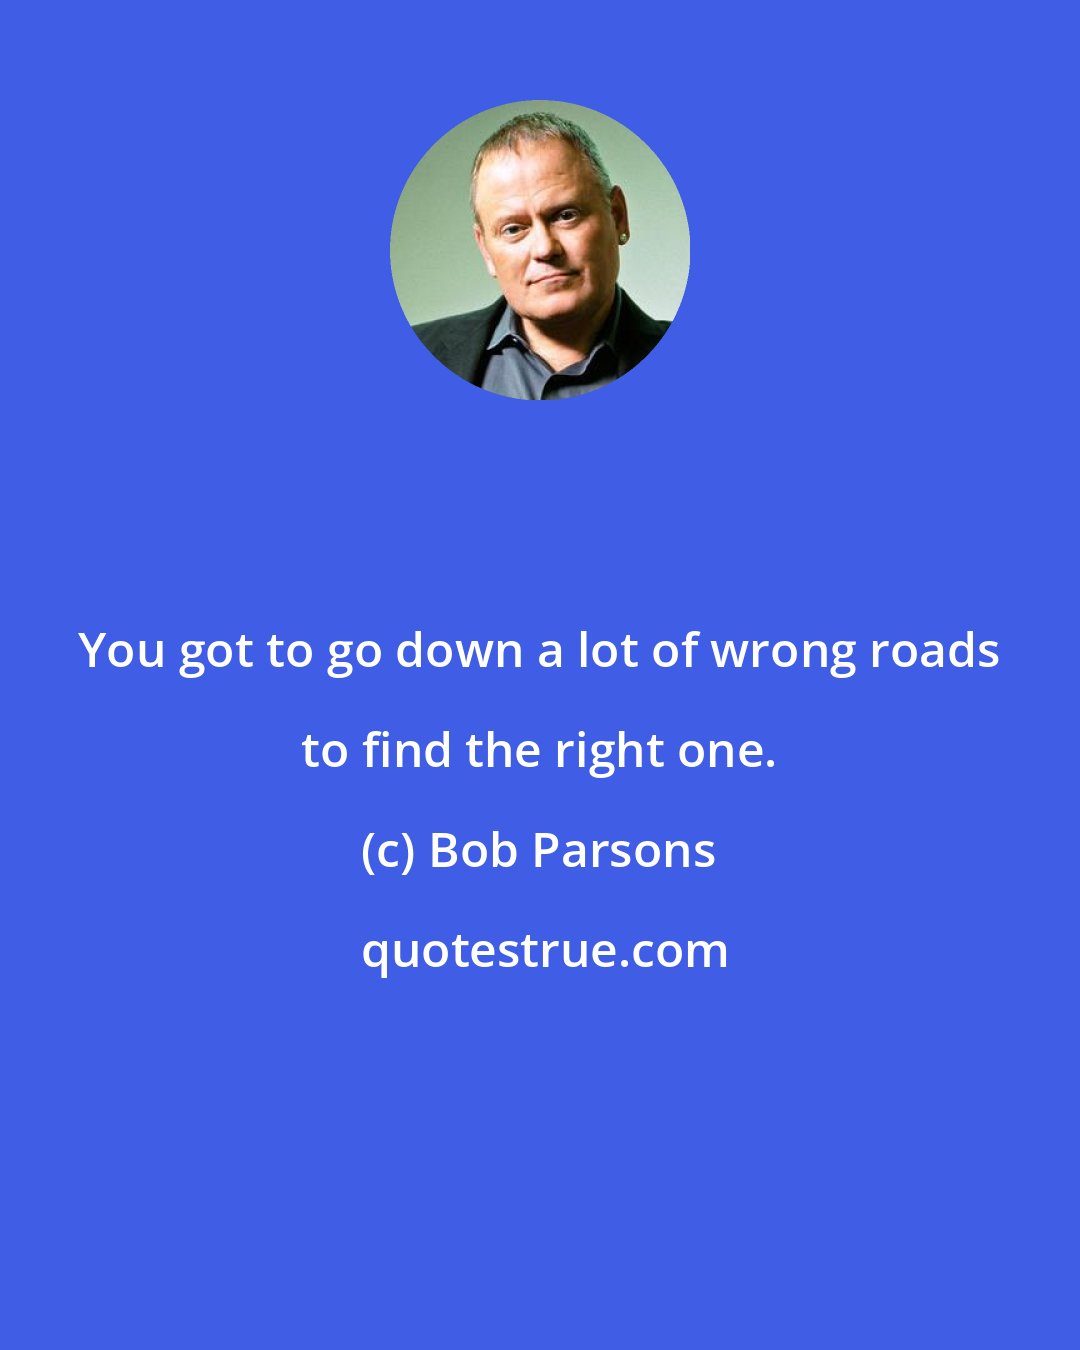 Bob Parsons: You got to go down a lot of wrong roads to find the right one.